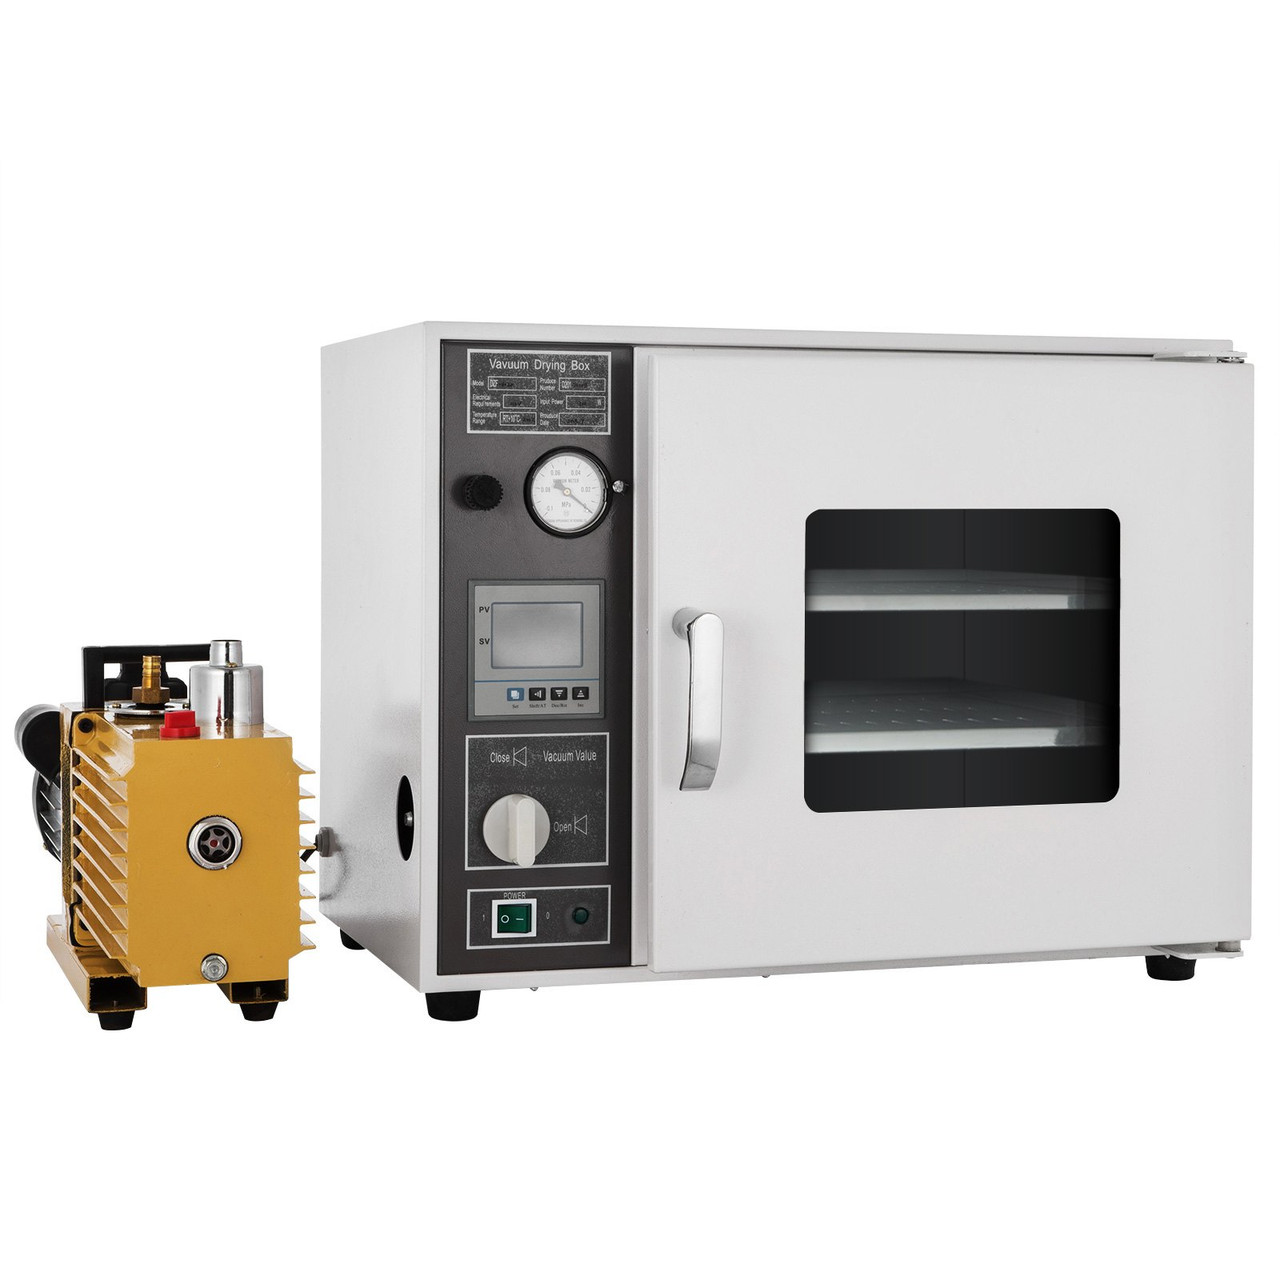 VEVOR 1.9 cu ft Drying Oven 9 cfm Vacuum Pump 133Pa Max. 1400W Heating Power 5 Trays